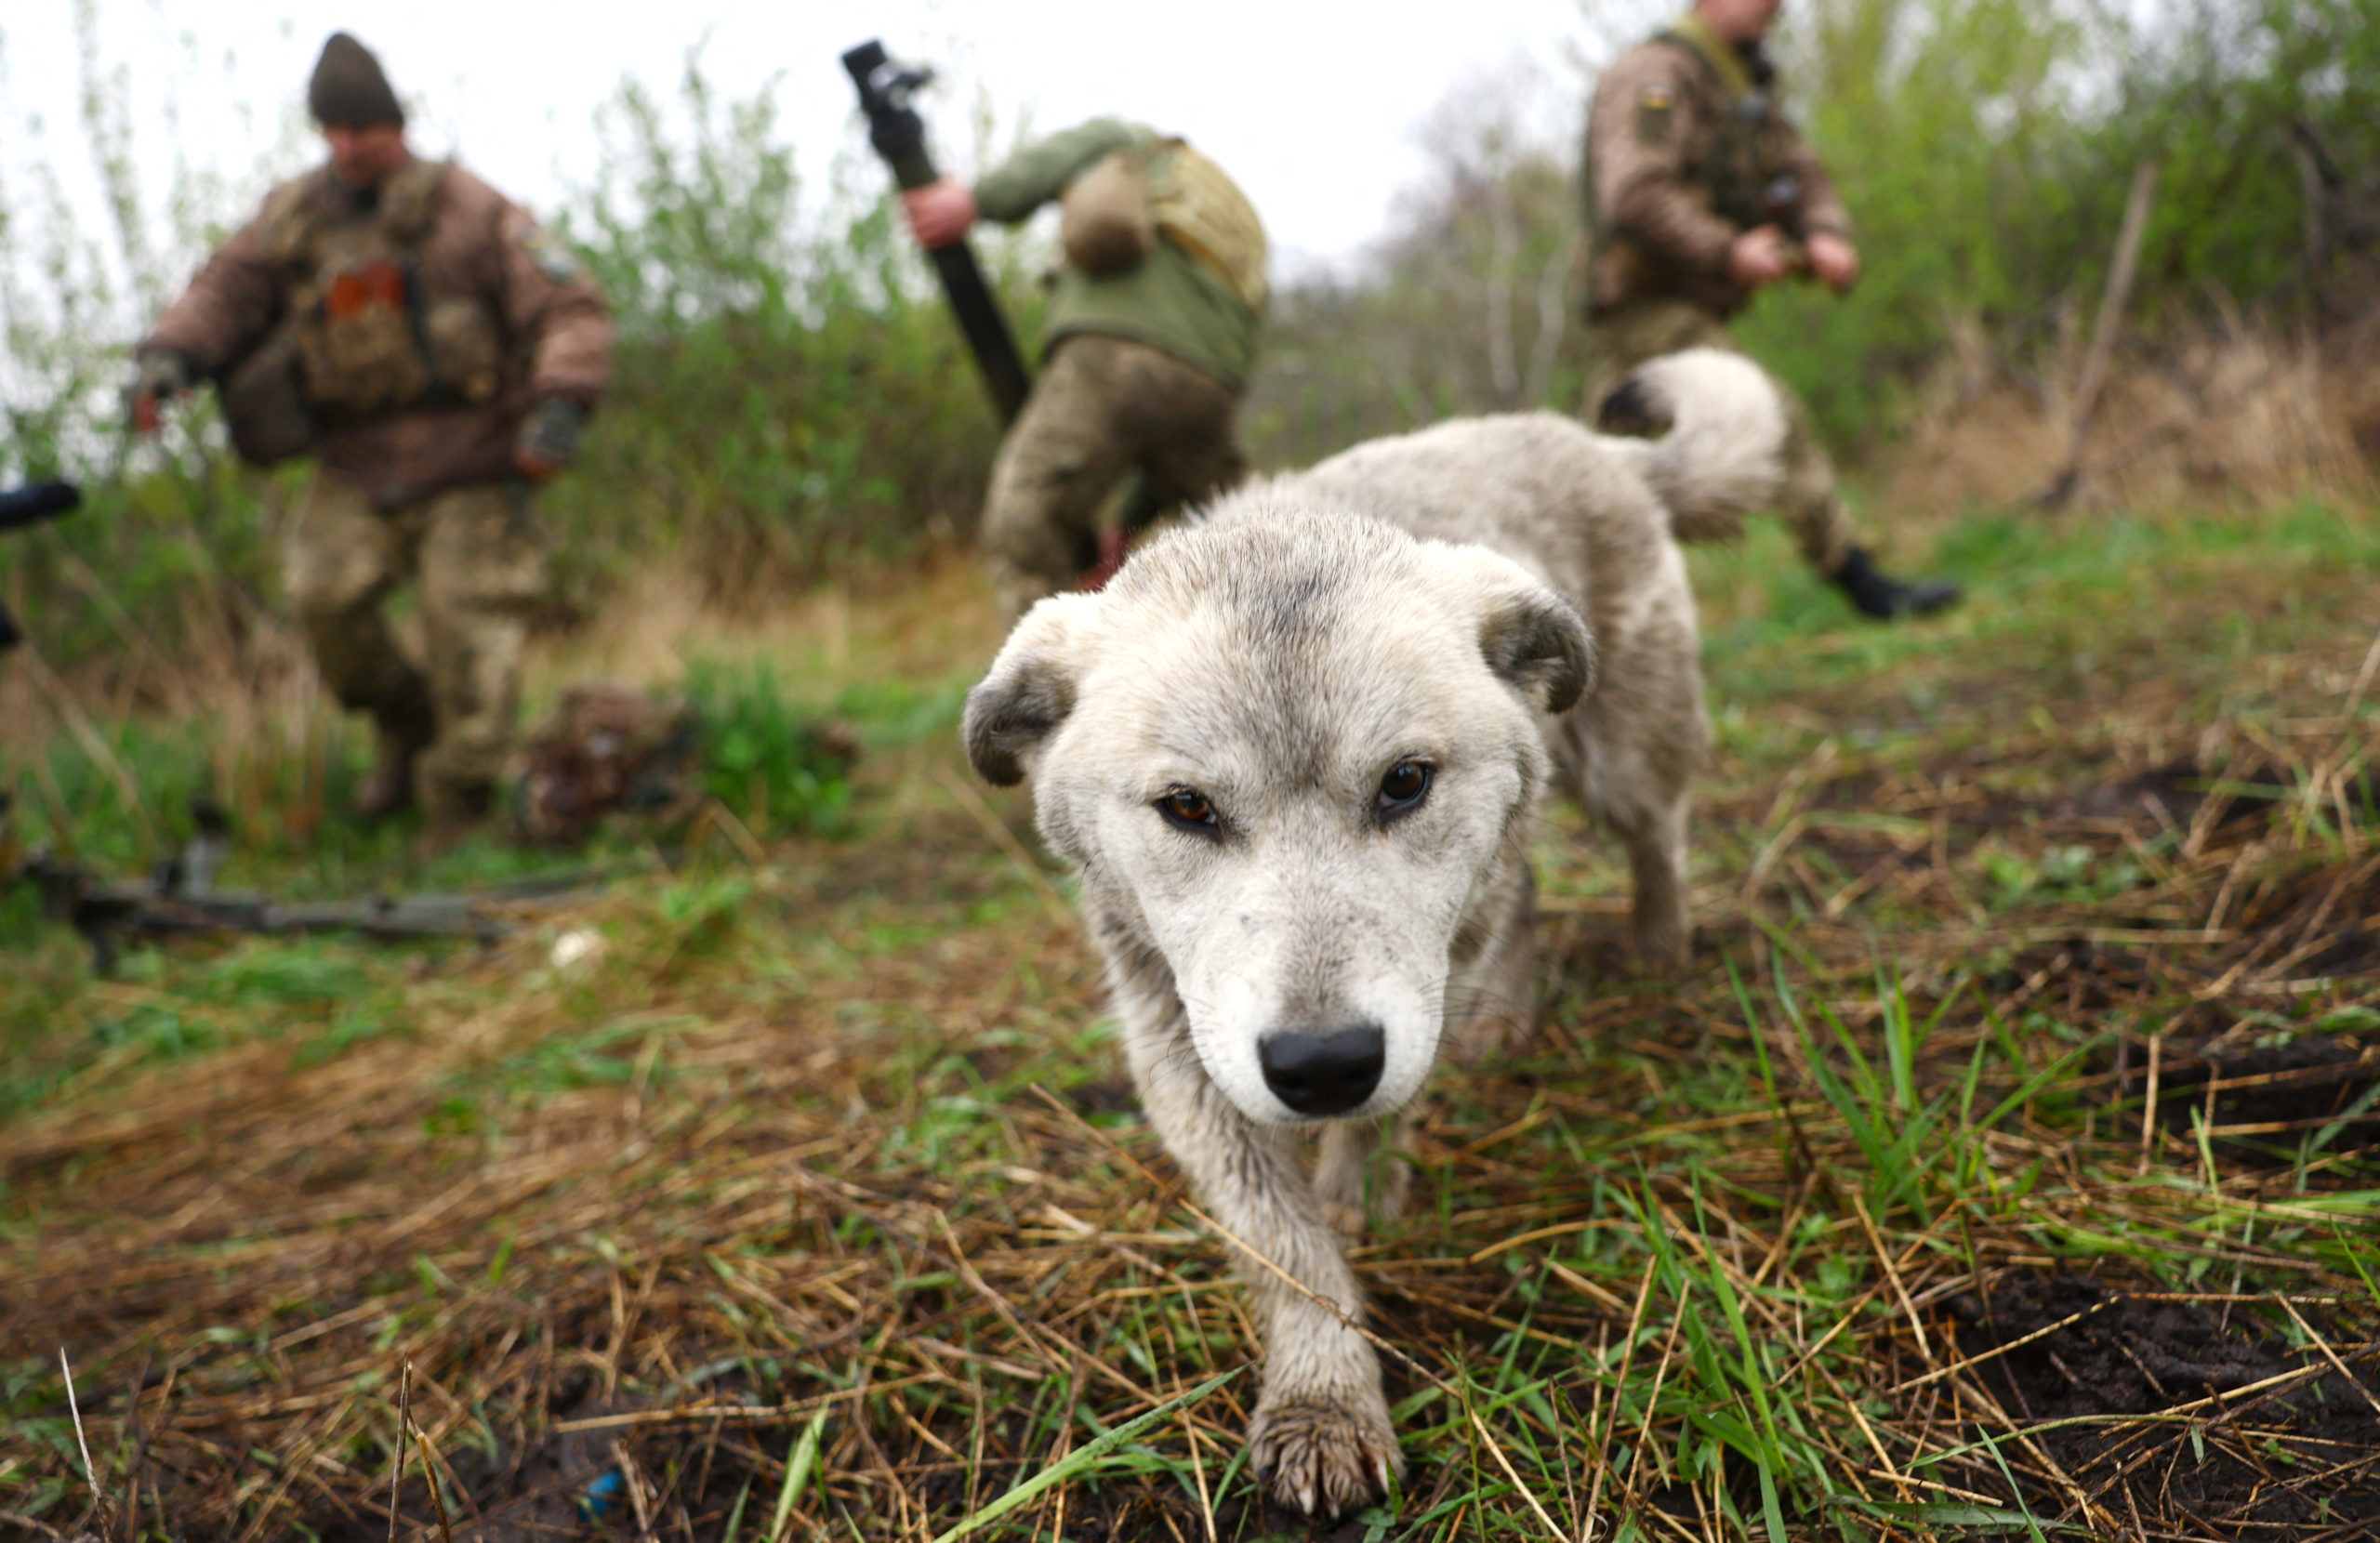 A dog walks away from members of the mountain brigade "Edelweiss" mortar unit who have returned from heavy fighting amid Russia's attack on Ukraine, close to Bakhmut, Ukraine, April 14, 2023. REUTERS/Kai Pfaffenbach